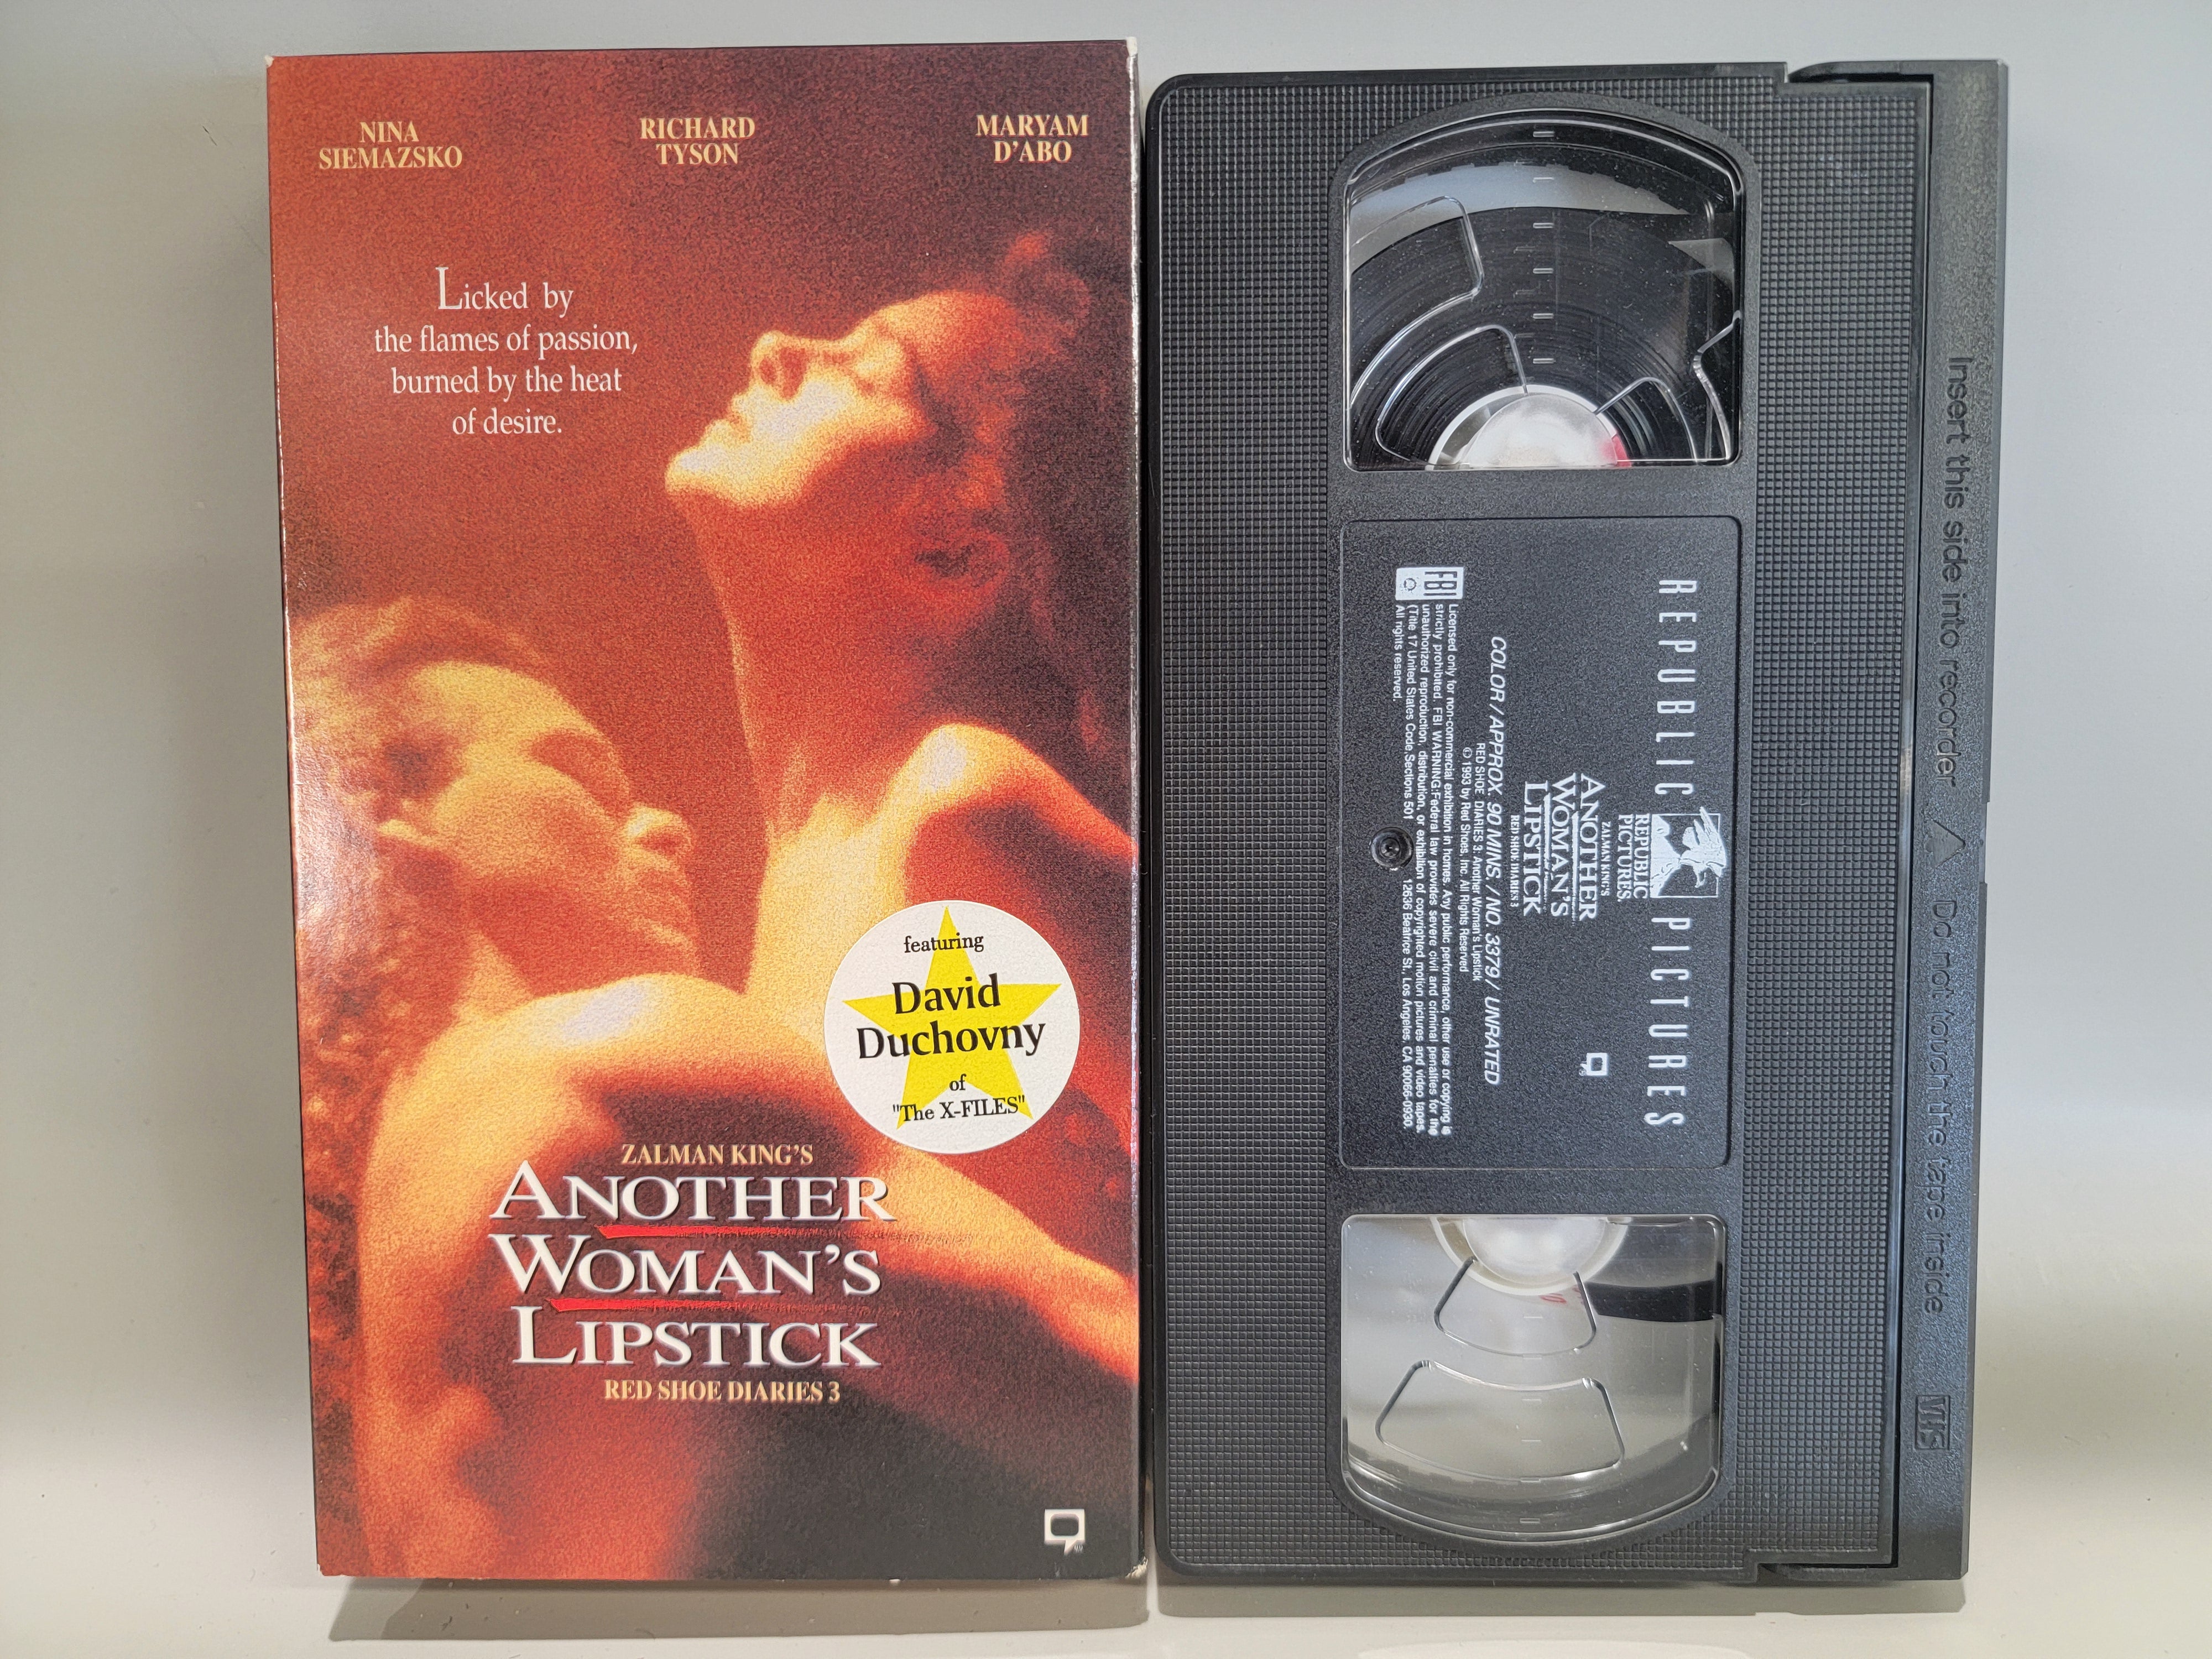 ANOTHER WOMAN'S LIPSTICK: RED SHOW DIARIES 3 VHS [USED]